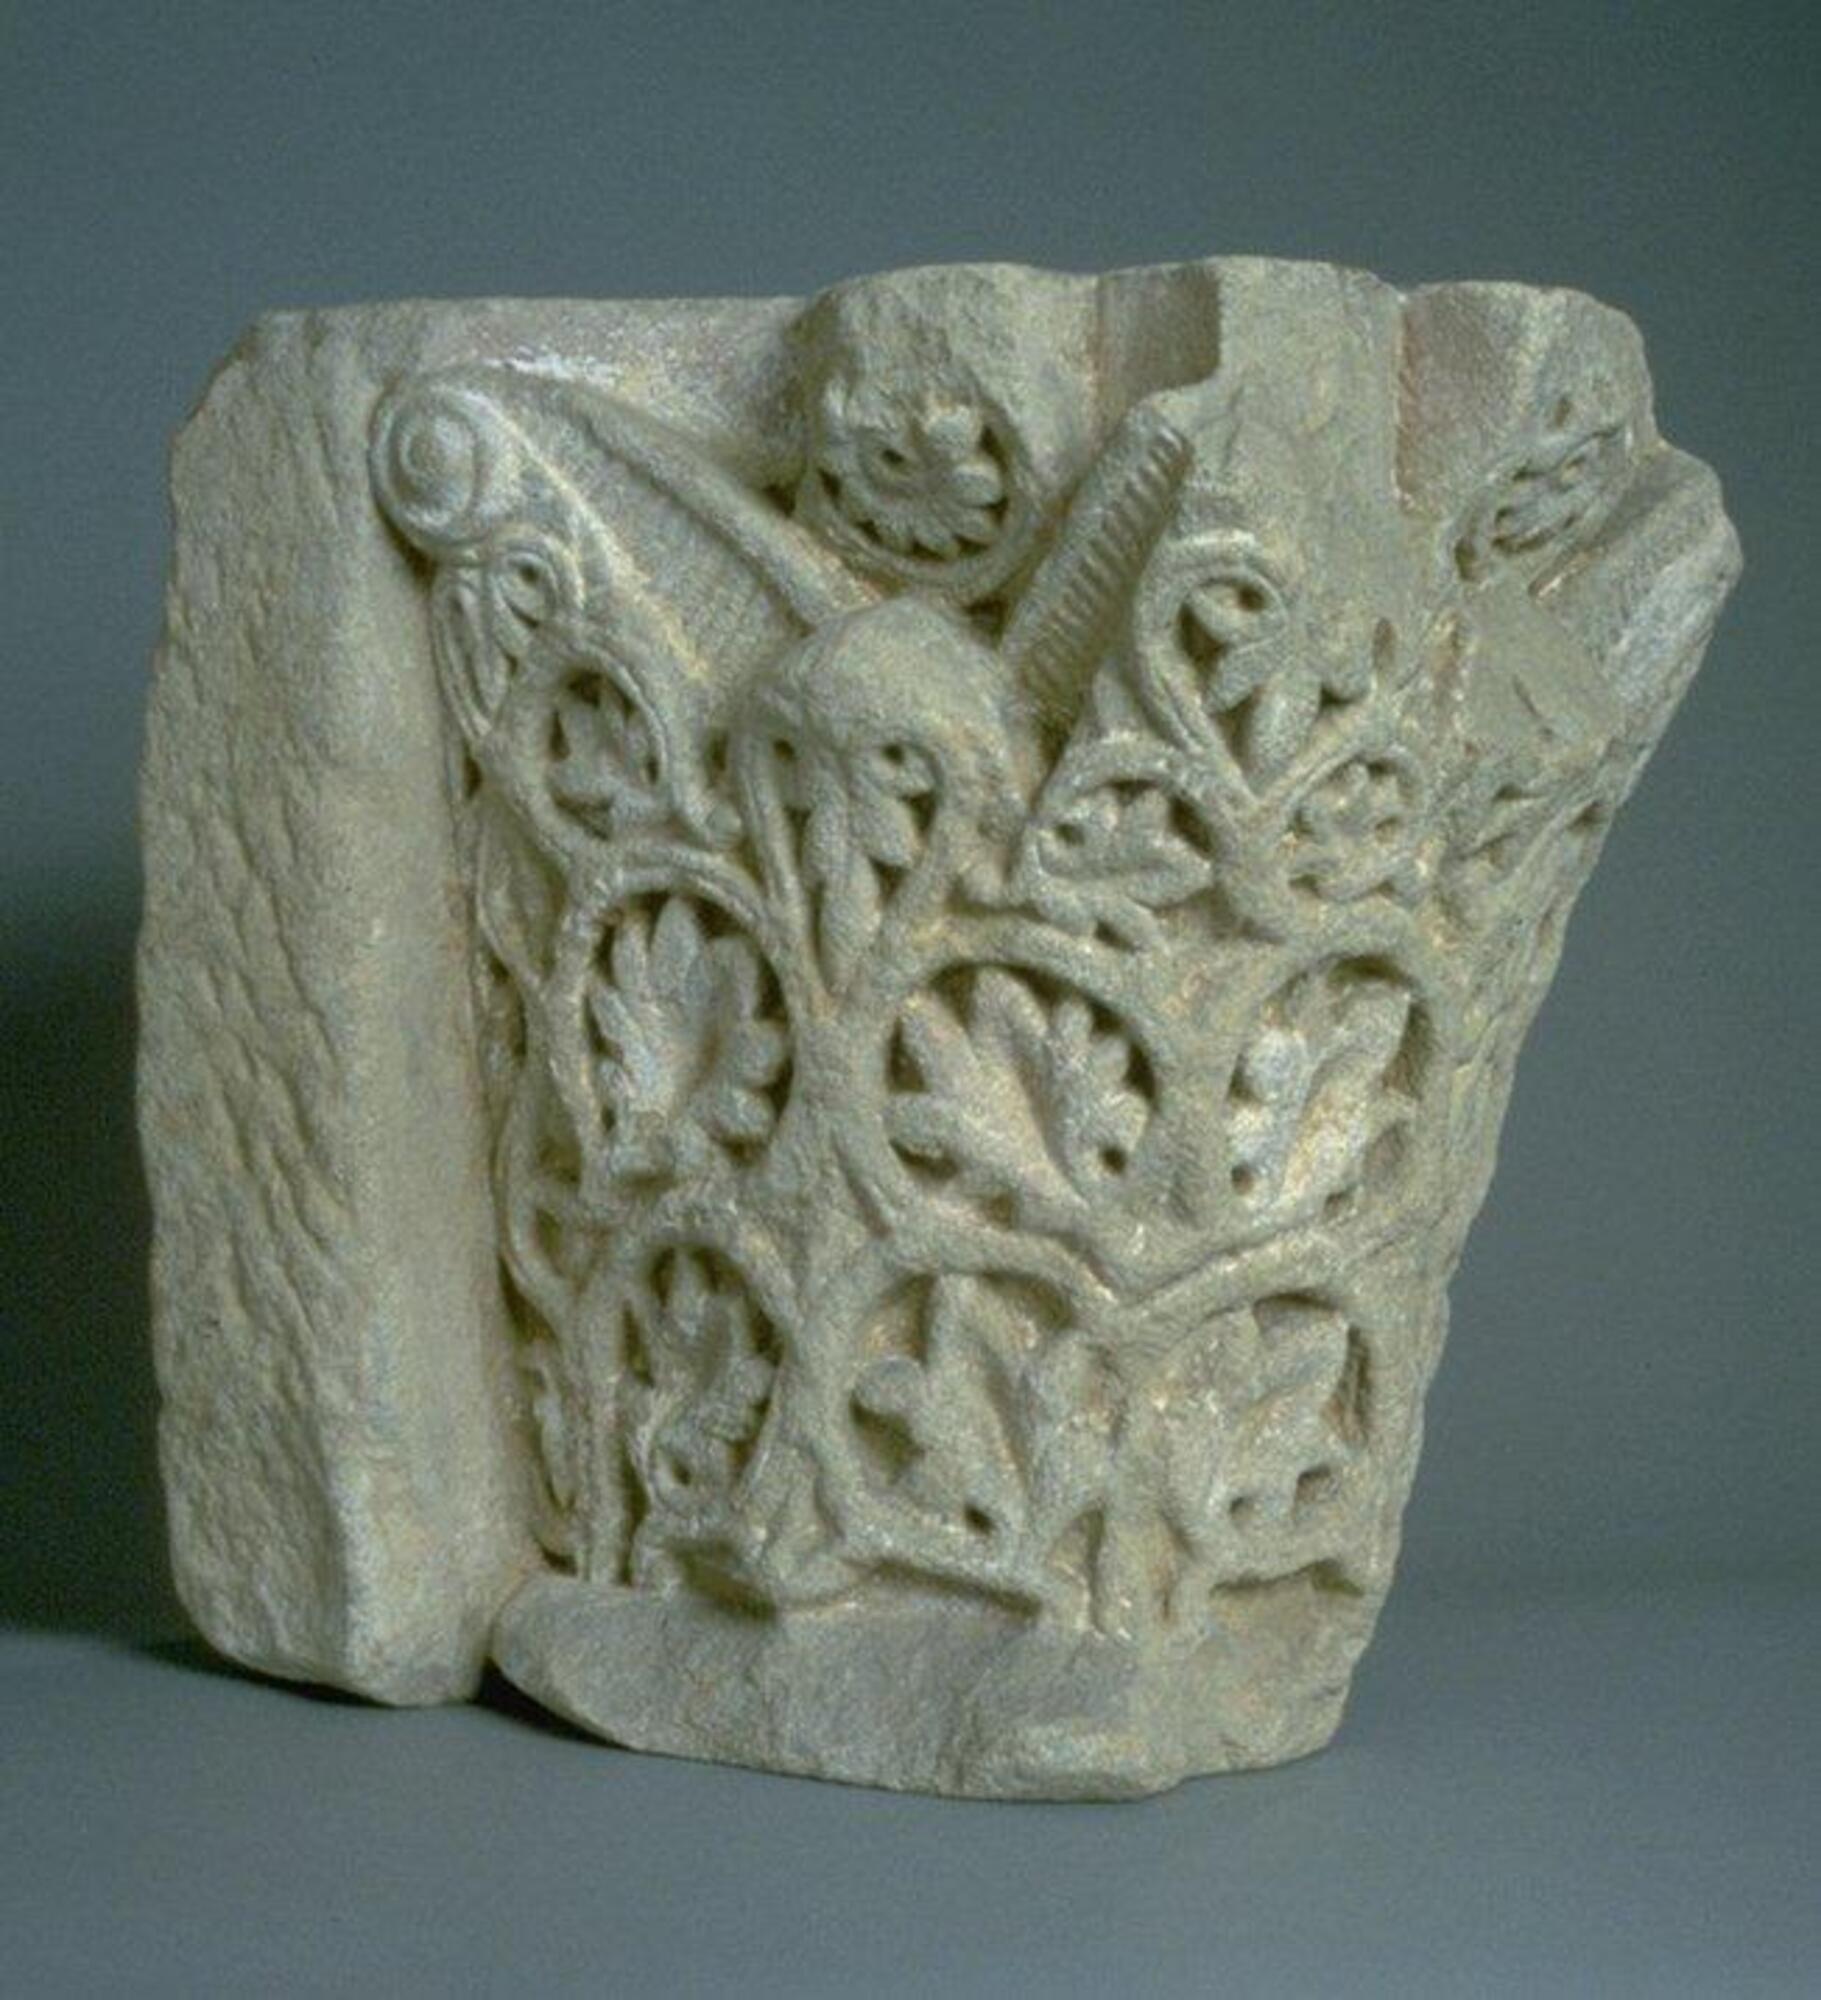 Engaged capital carved in grayish, coarse sandstone (arkose). The bell-shaped drum is decorated with a pattern of vine rinceau that encircles palmette leaves in a roughly symmetrical arrangement on each face of the capital. These ornamental plant forms are deeply undercut to highlight the pattern in sharp relief. A pair of volutes decorated with vertical striations springs from the vine rinceau in the upper portion of each face of the capital. A rosette enclosed in a circle appears at the top edge of the center of each face of the capital, above the point where the branches of the volutes diverge.